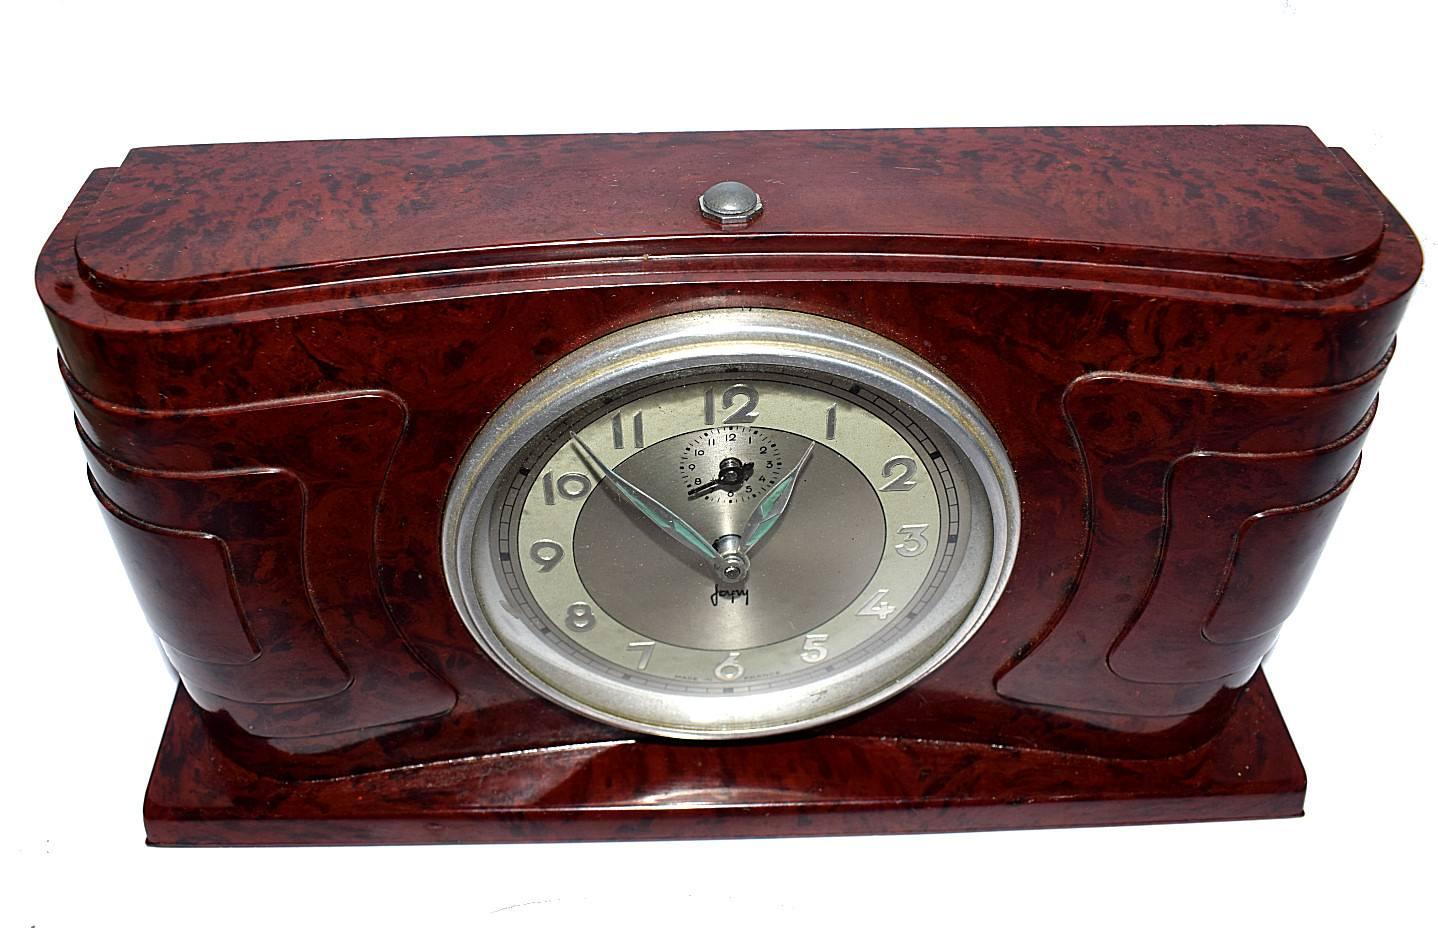 Very attractive and totally authentic 1930s French Bakelite clock by the clock makers 'Japy'. The streamline casing is in a deep mottled red bakelite and is excellent condition with no damage to report. The clock works well and has a nice mellow